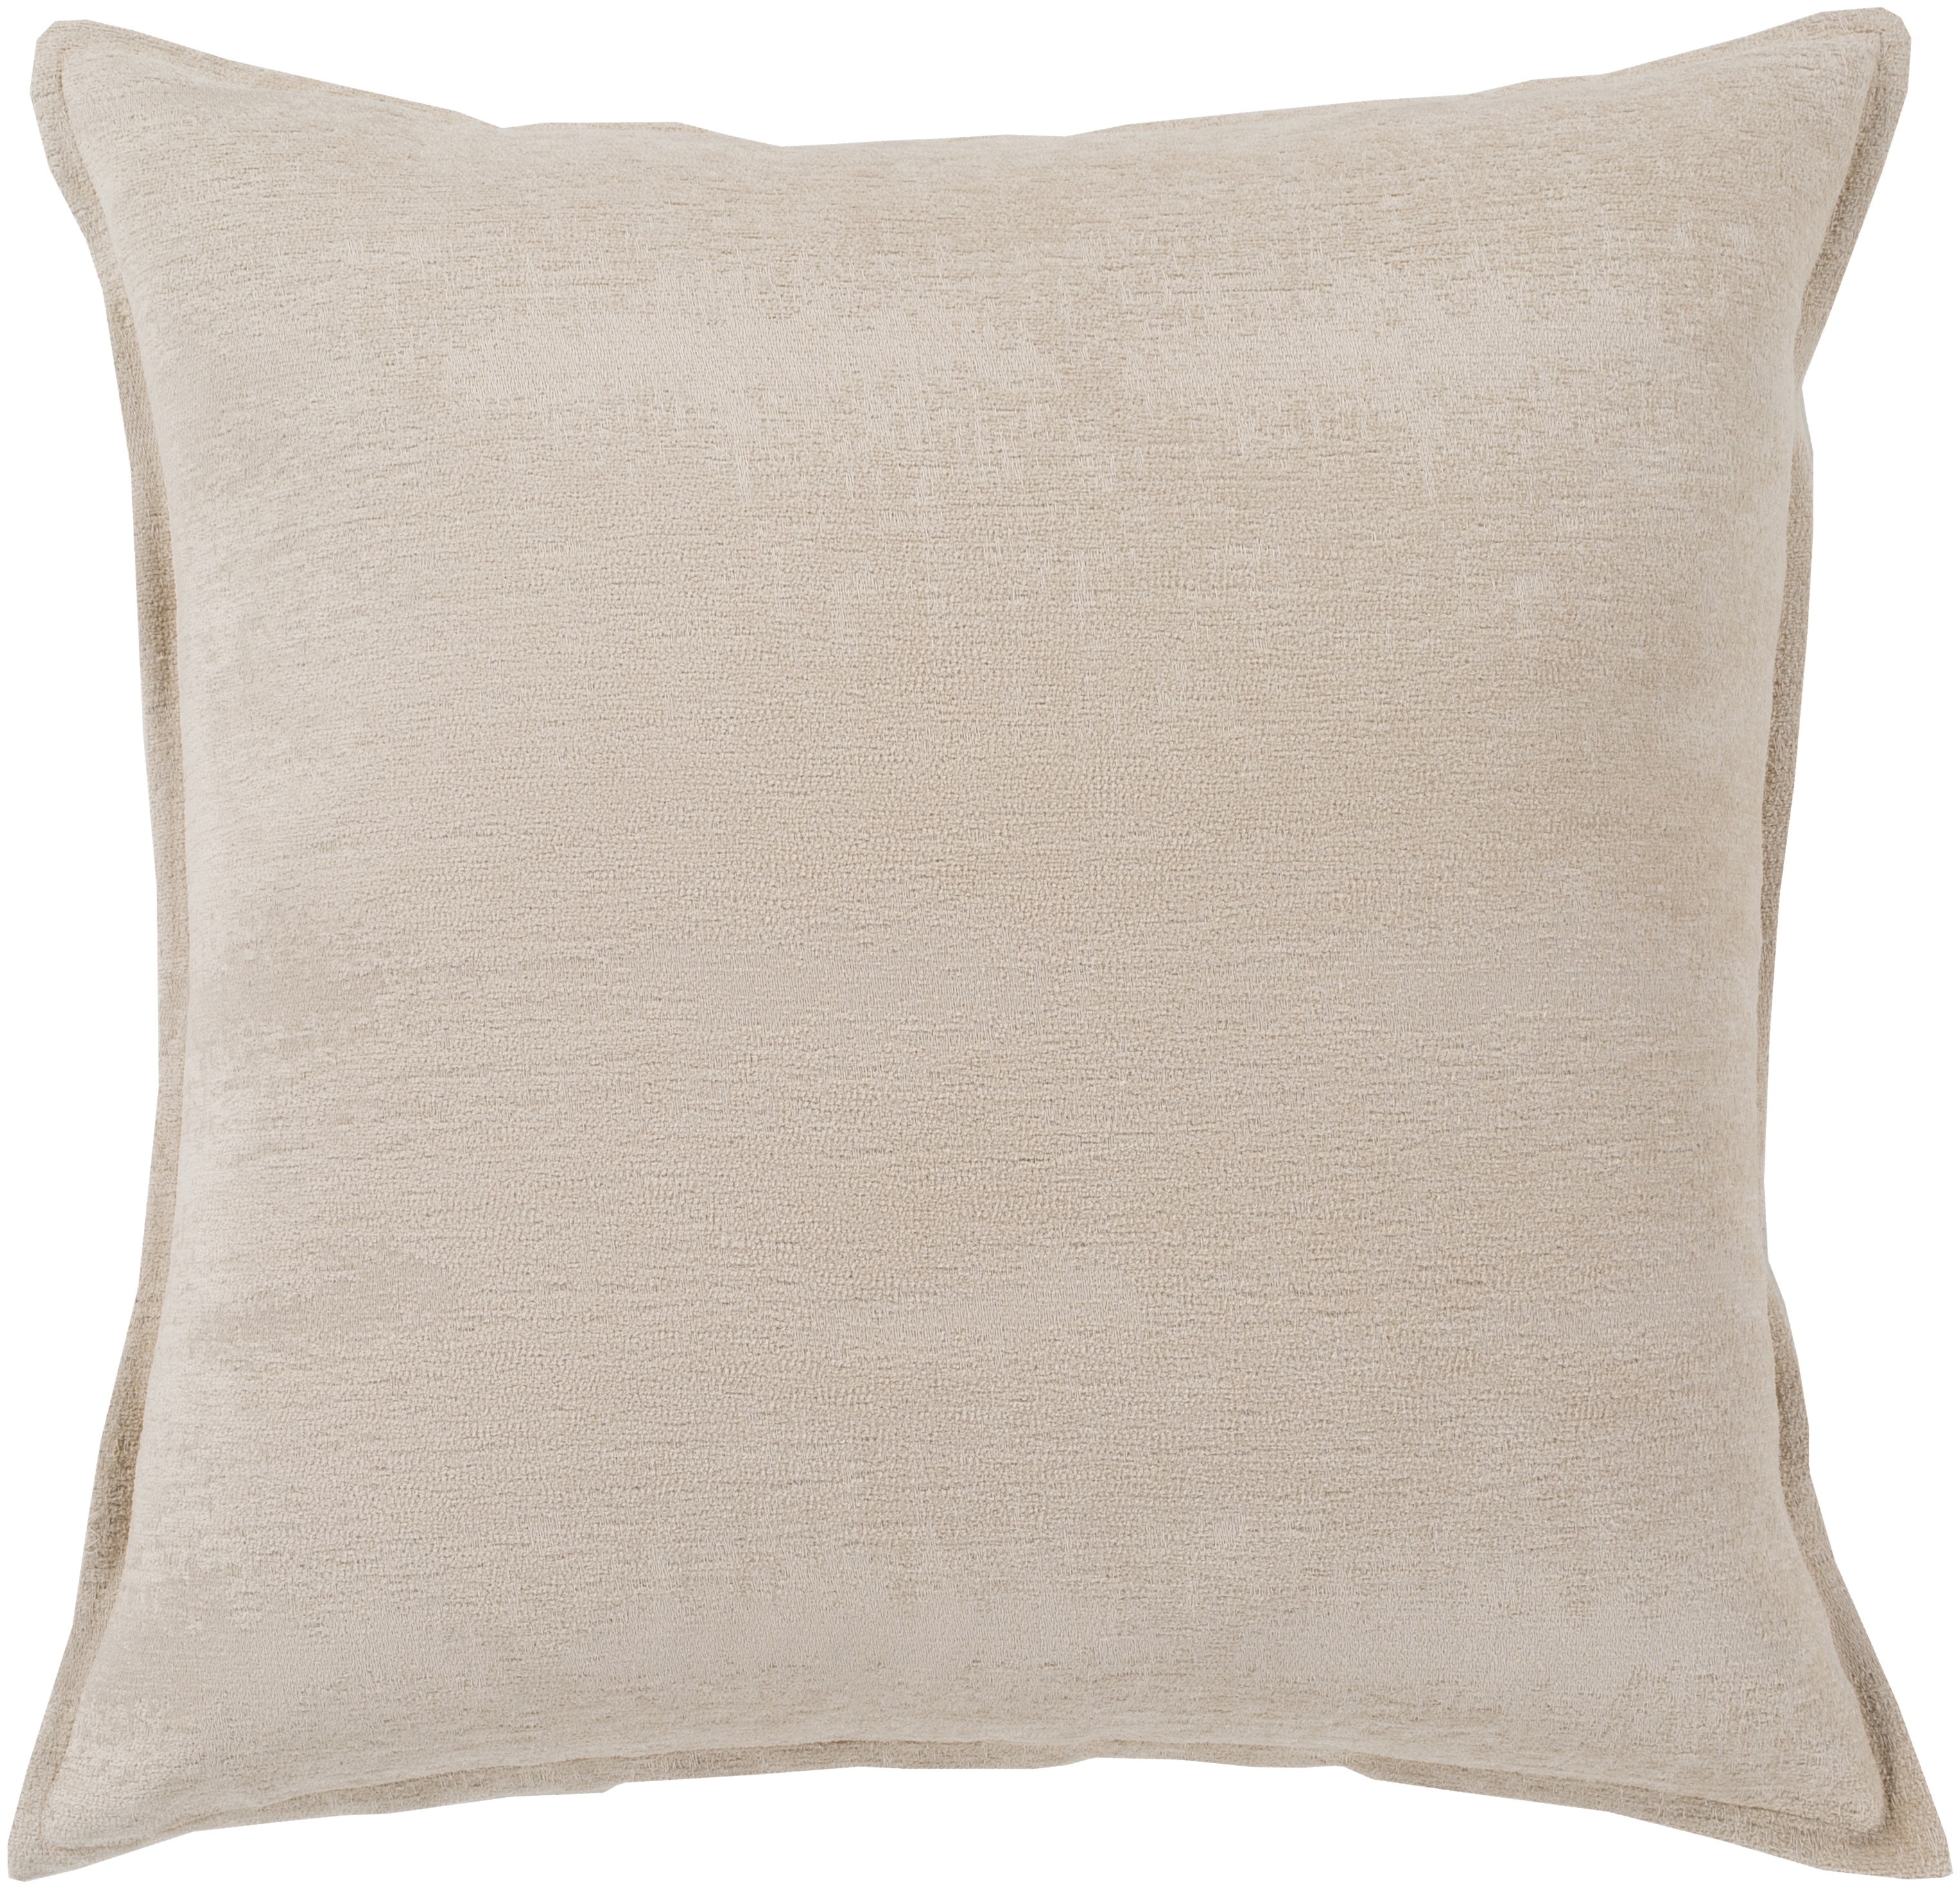 Copacetic Throw Pillow, 20" x 20", pillow cover only - Image 0